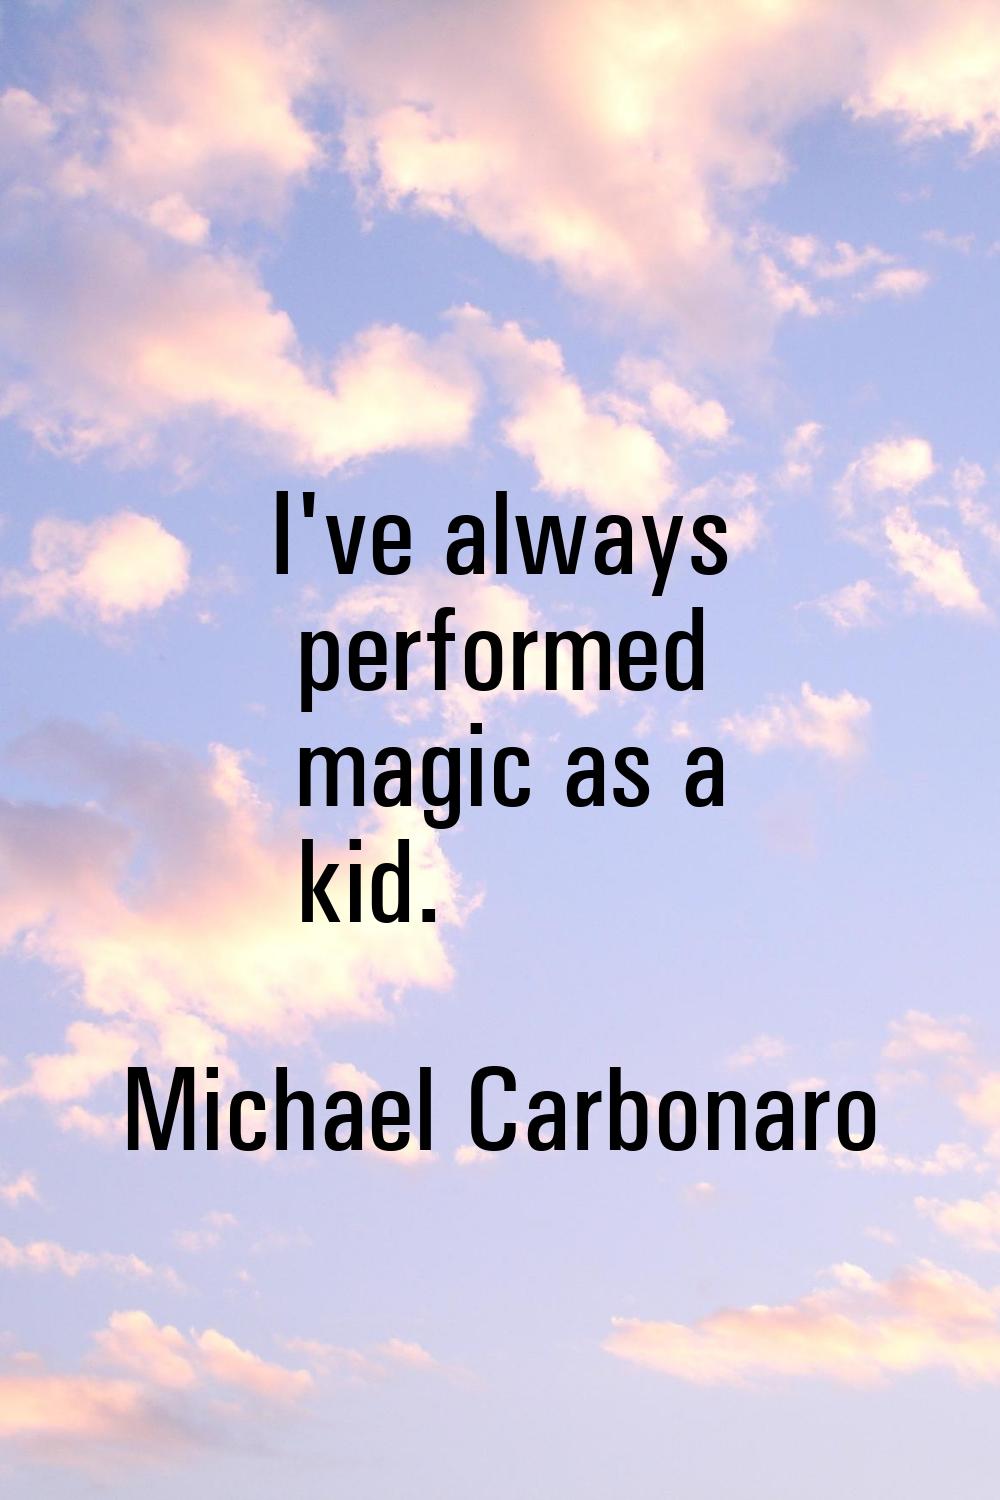 I've always performed magic as a kid.